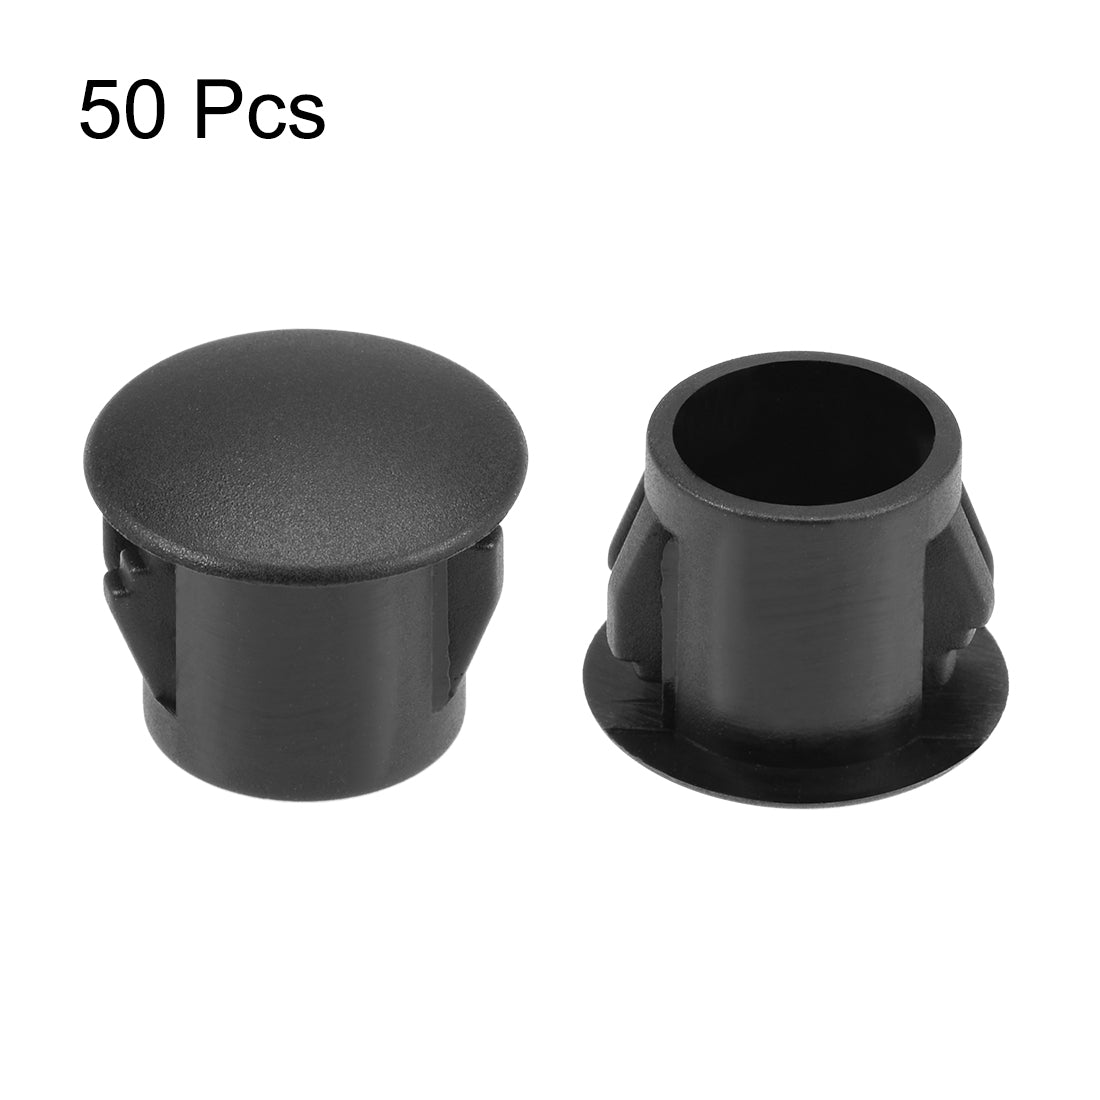 uxcell Uxcell Hole Plugs Black Plastic 10mm(3/8-inch) Snap in Locking Hole Tube Fastener Cover Flush Type Panel Plugs 50 Pcs